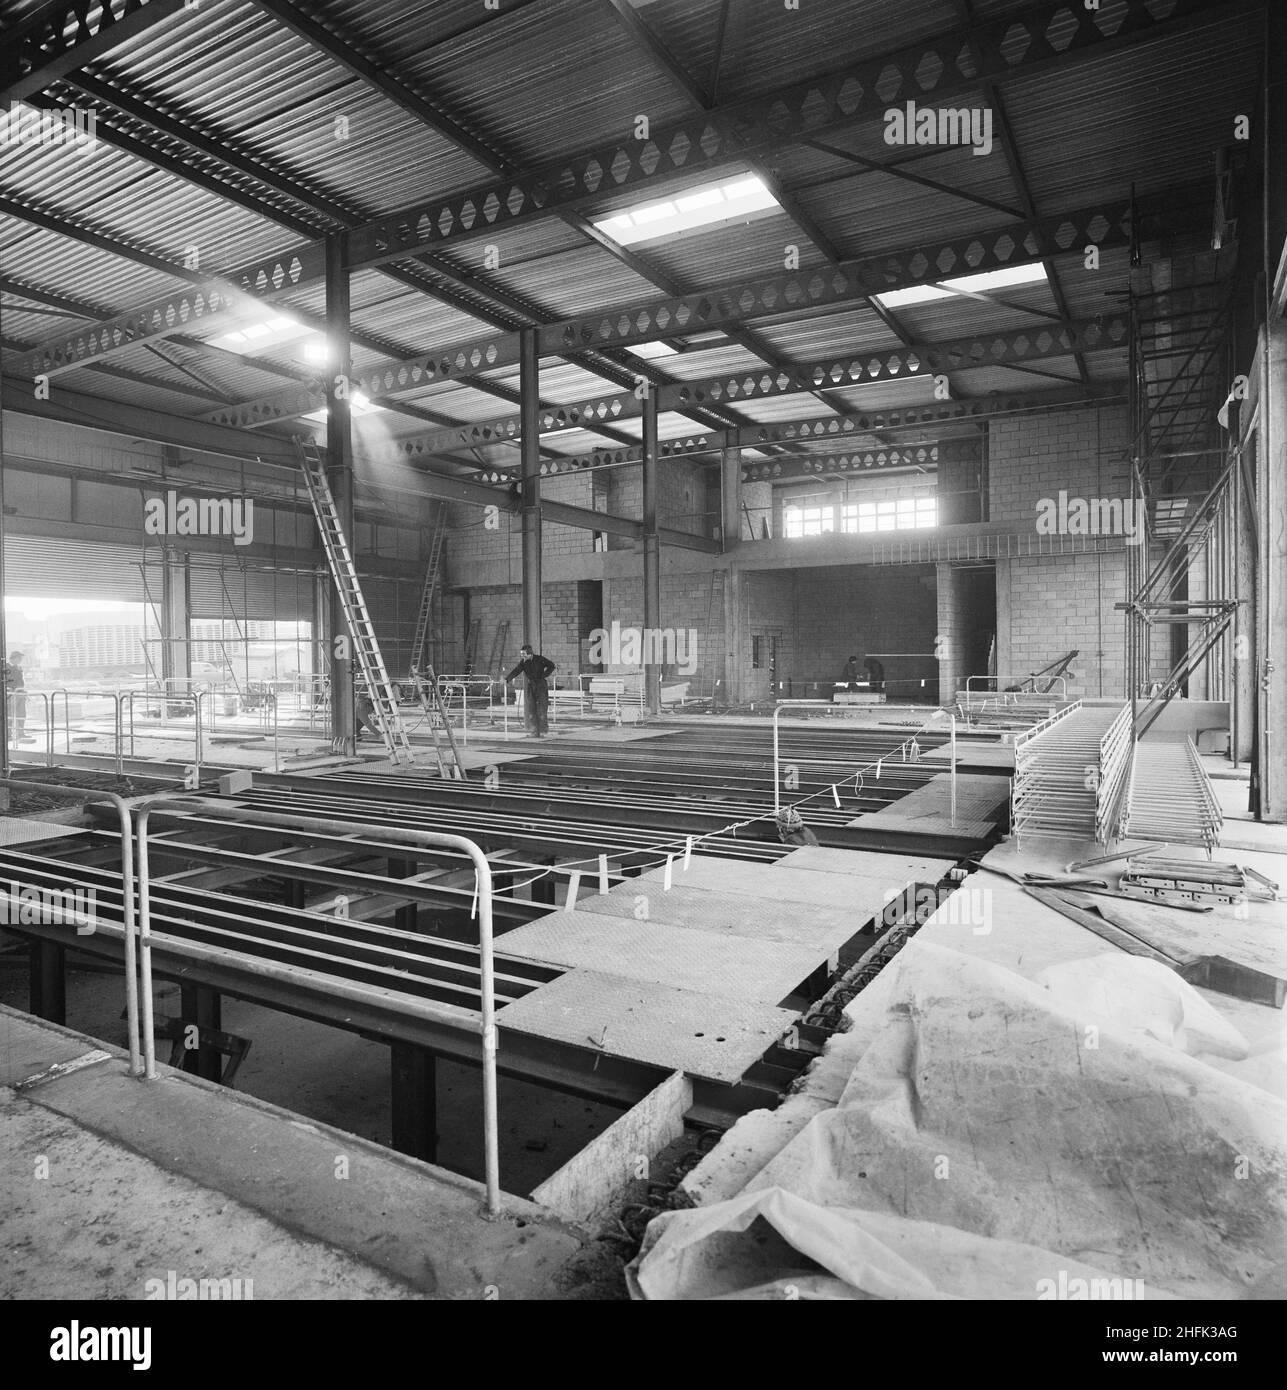 Courage Brewery, Imperial Way, Worton Grange, Reading, 20/11/1979. The interior of the loading bay at the Courage Brewery with much of the false flooring yet to be installed and the basement level exposed. Stock Photo